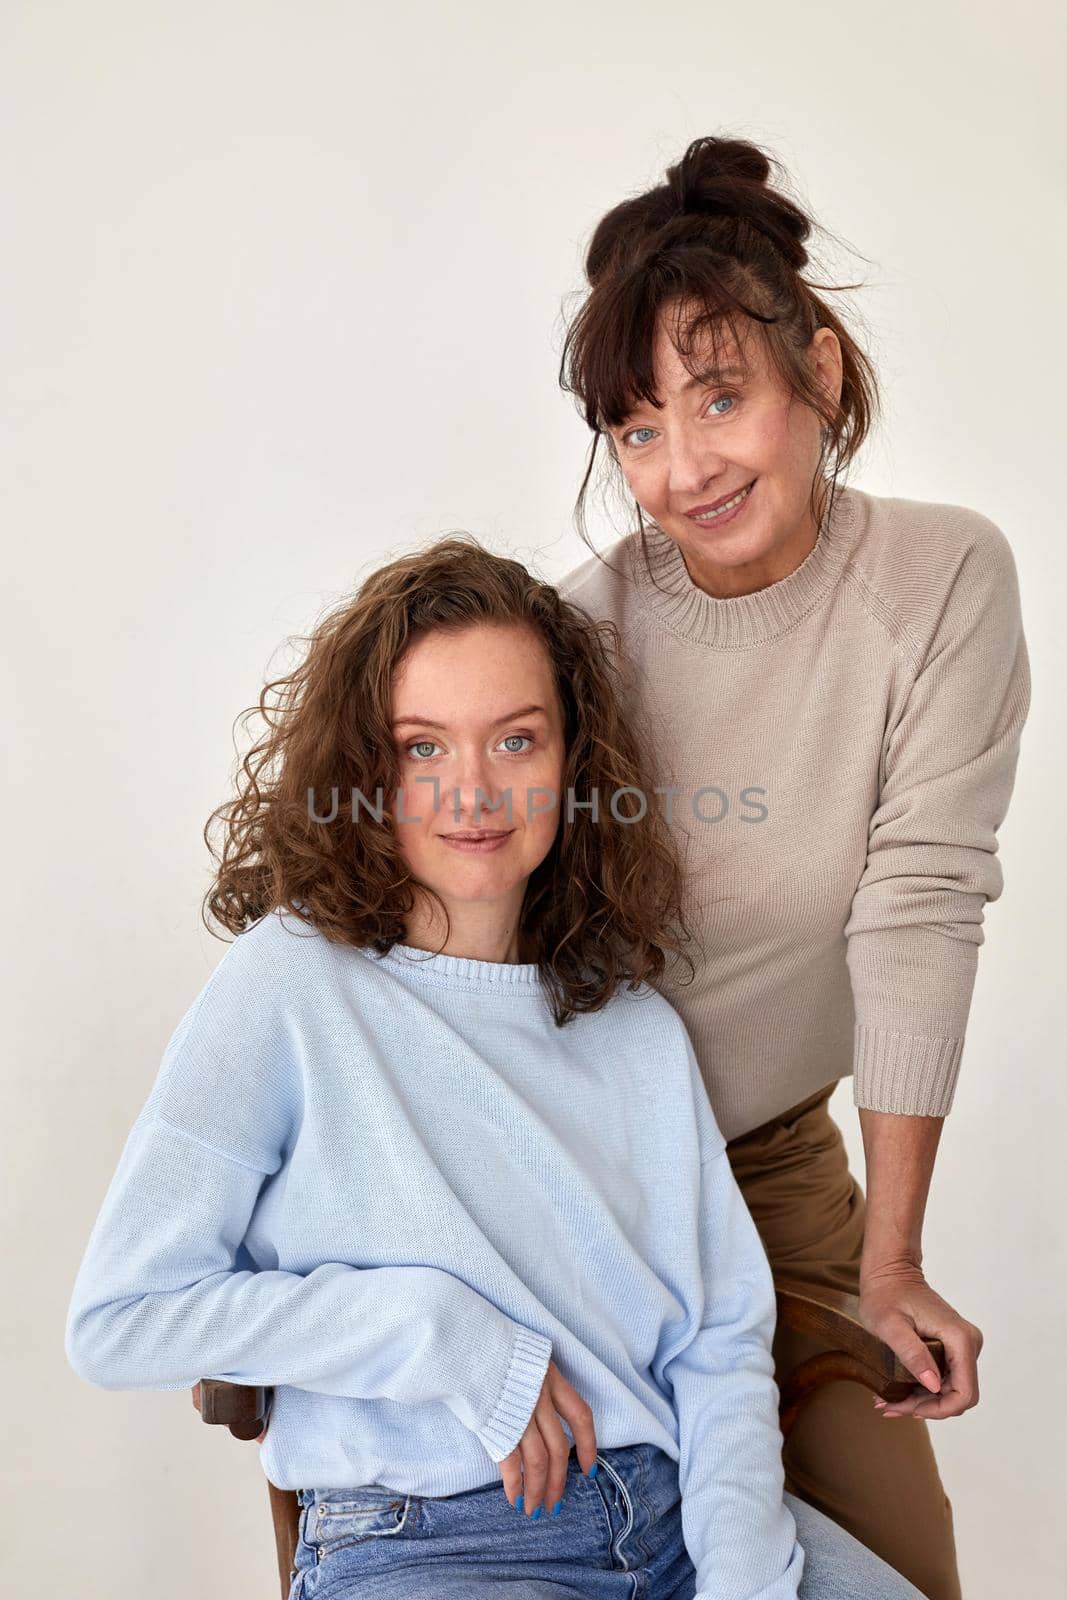 Middle aged and young female models wearing casual warm woolen sweaters looking at camera against white background